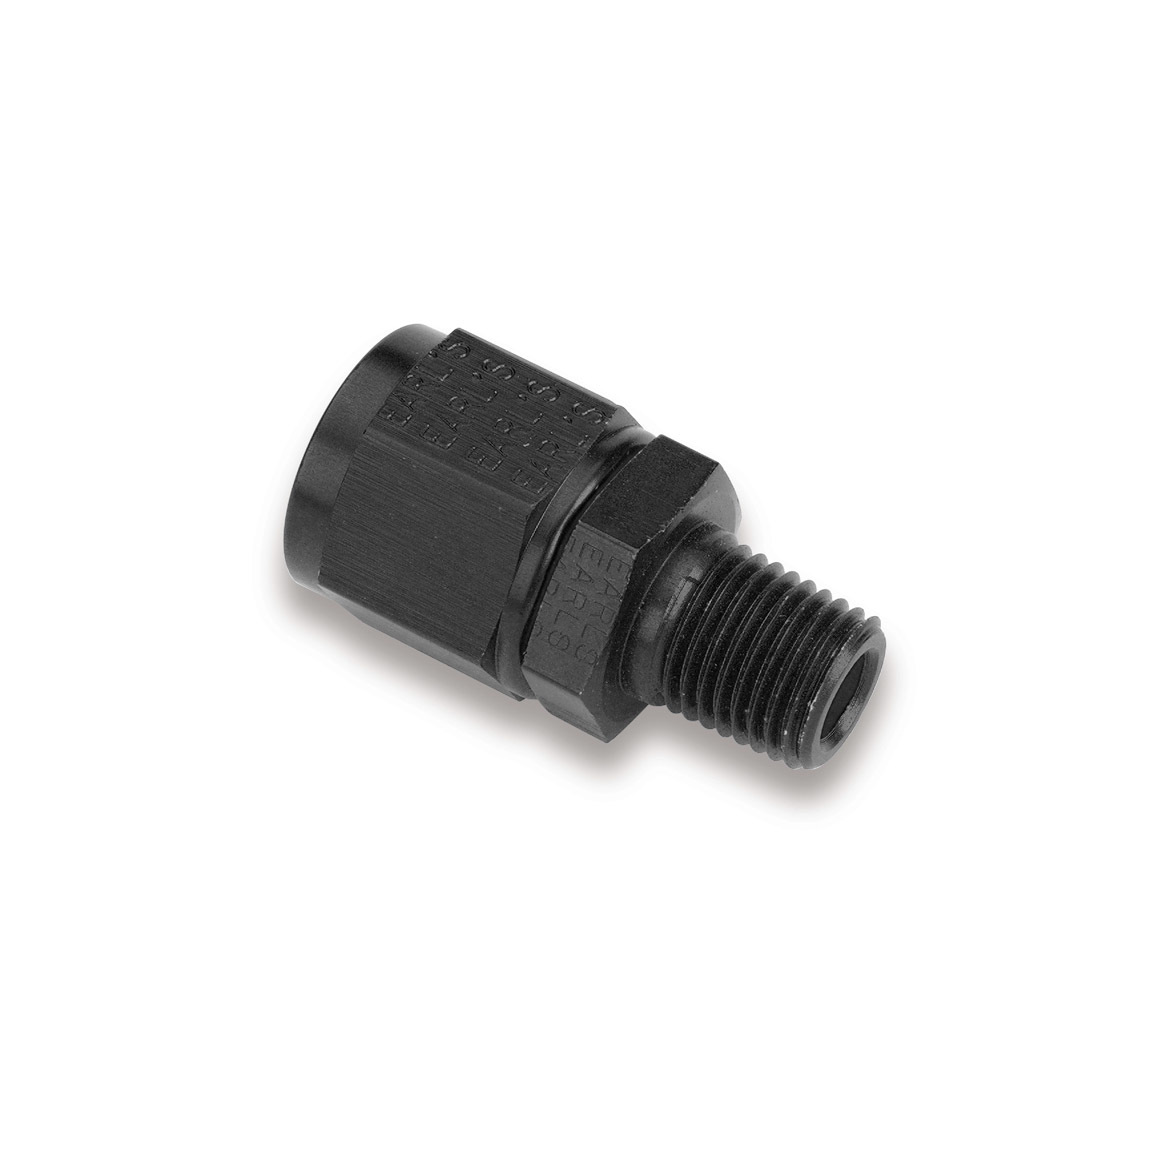 Earls AT916166ERL Fitting, Adapter, Straight, 6 AN Female Swivel to 3/8 in NPT Male, Aluminum, Black Anodized, Each